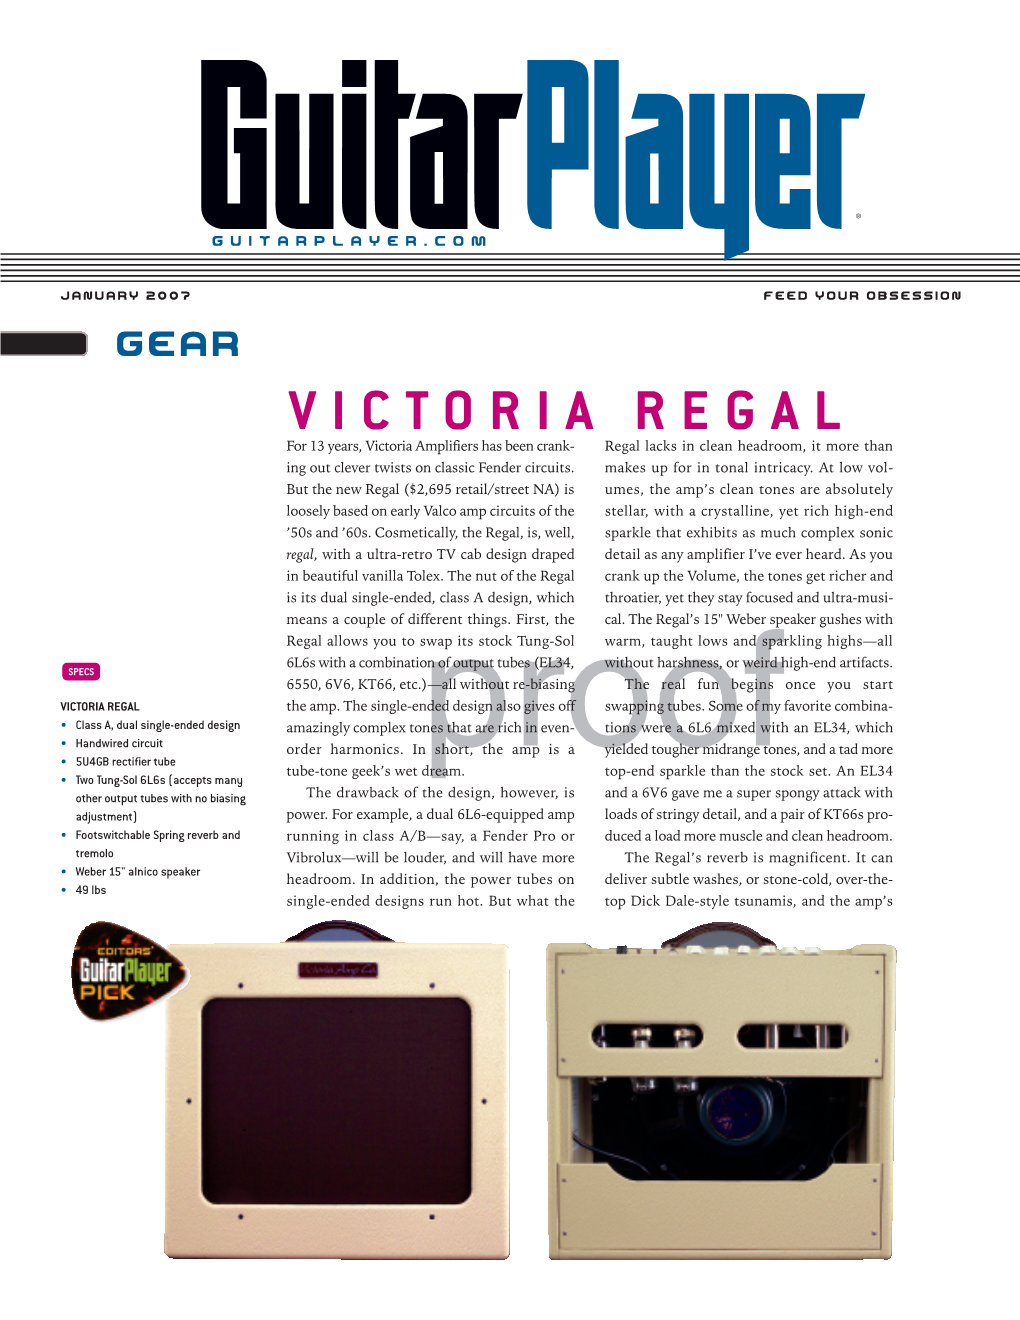 VICTORIA REGAL for 13 Years, Victoria Amplifiers Has Been Crank- Regal Lacks in Clean Headroom, It More Than Ing out Clever Twists on Classic Fender Circuits